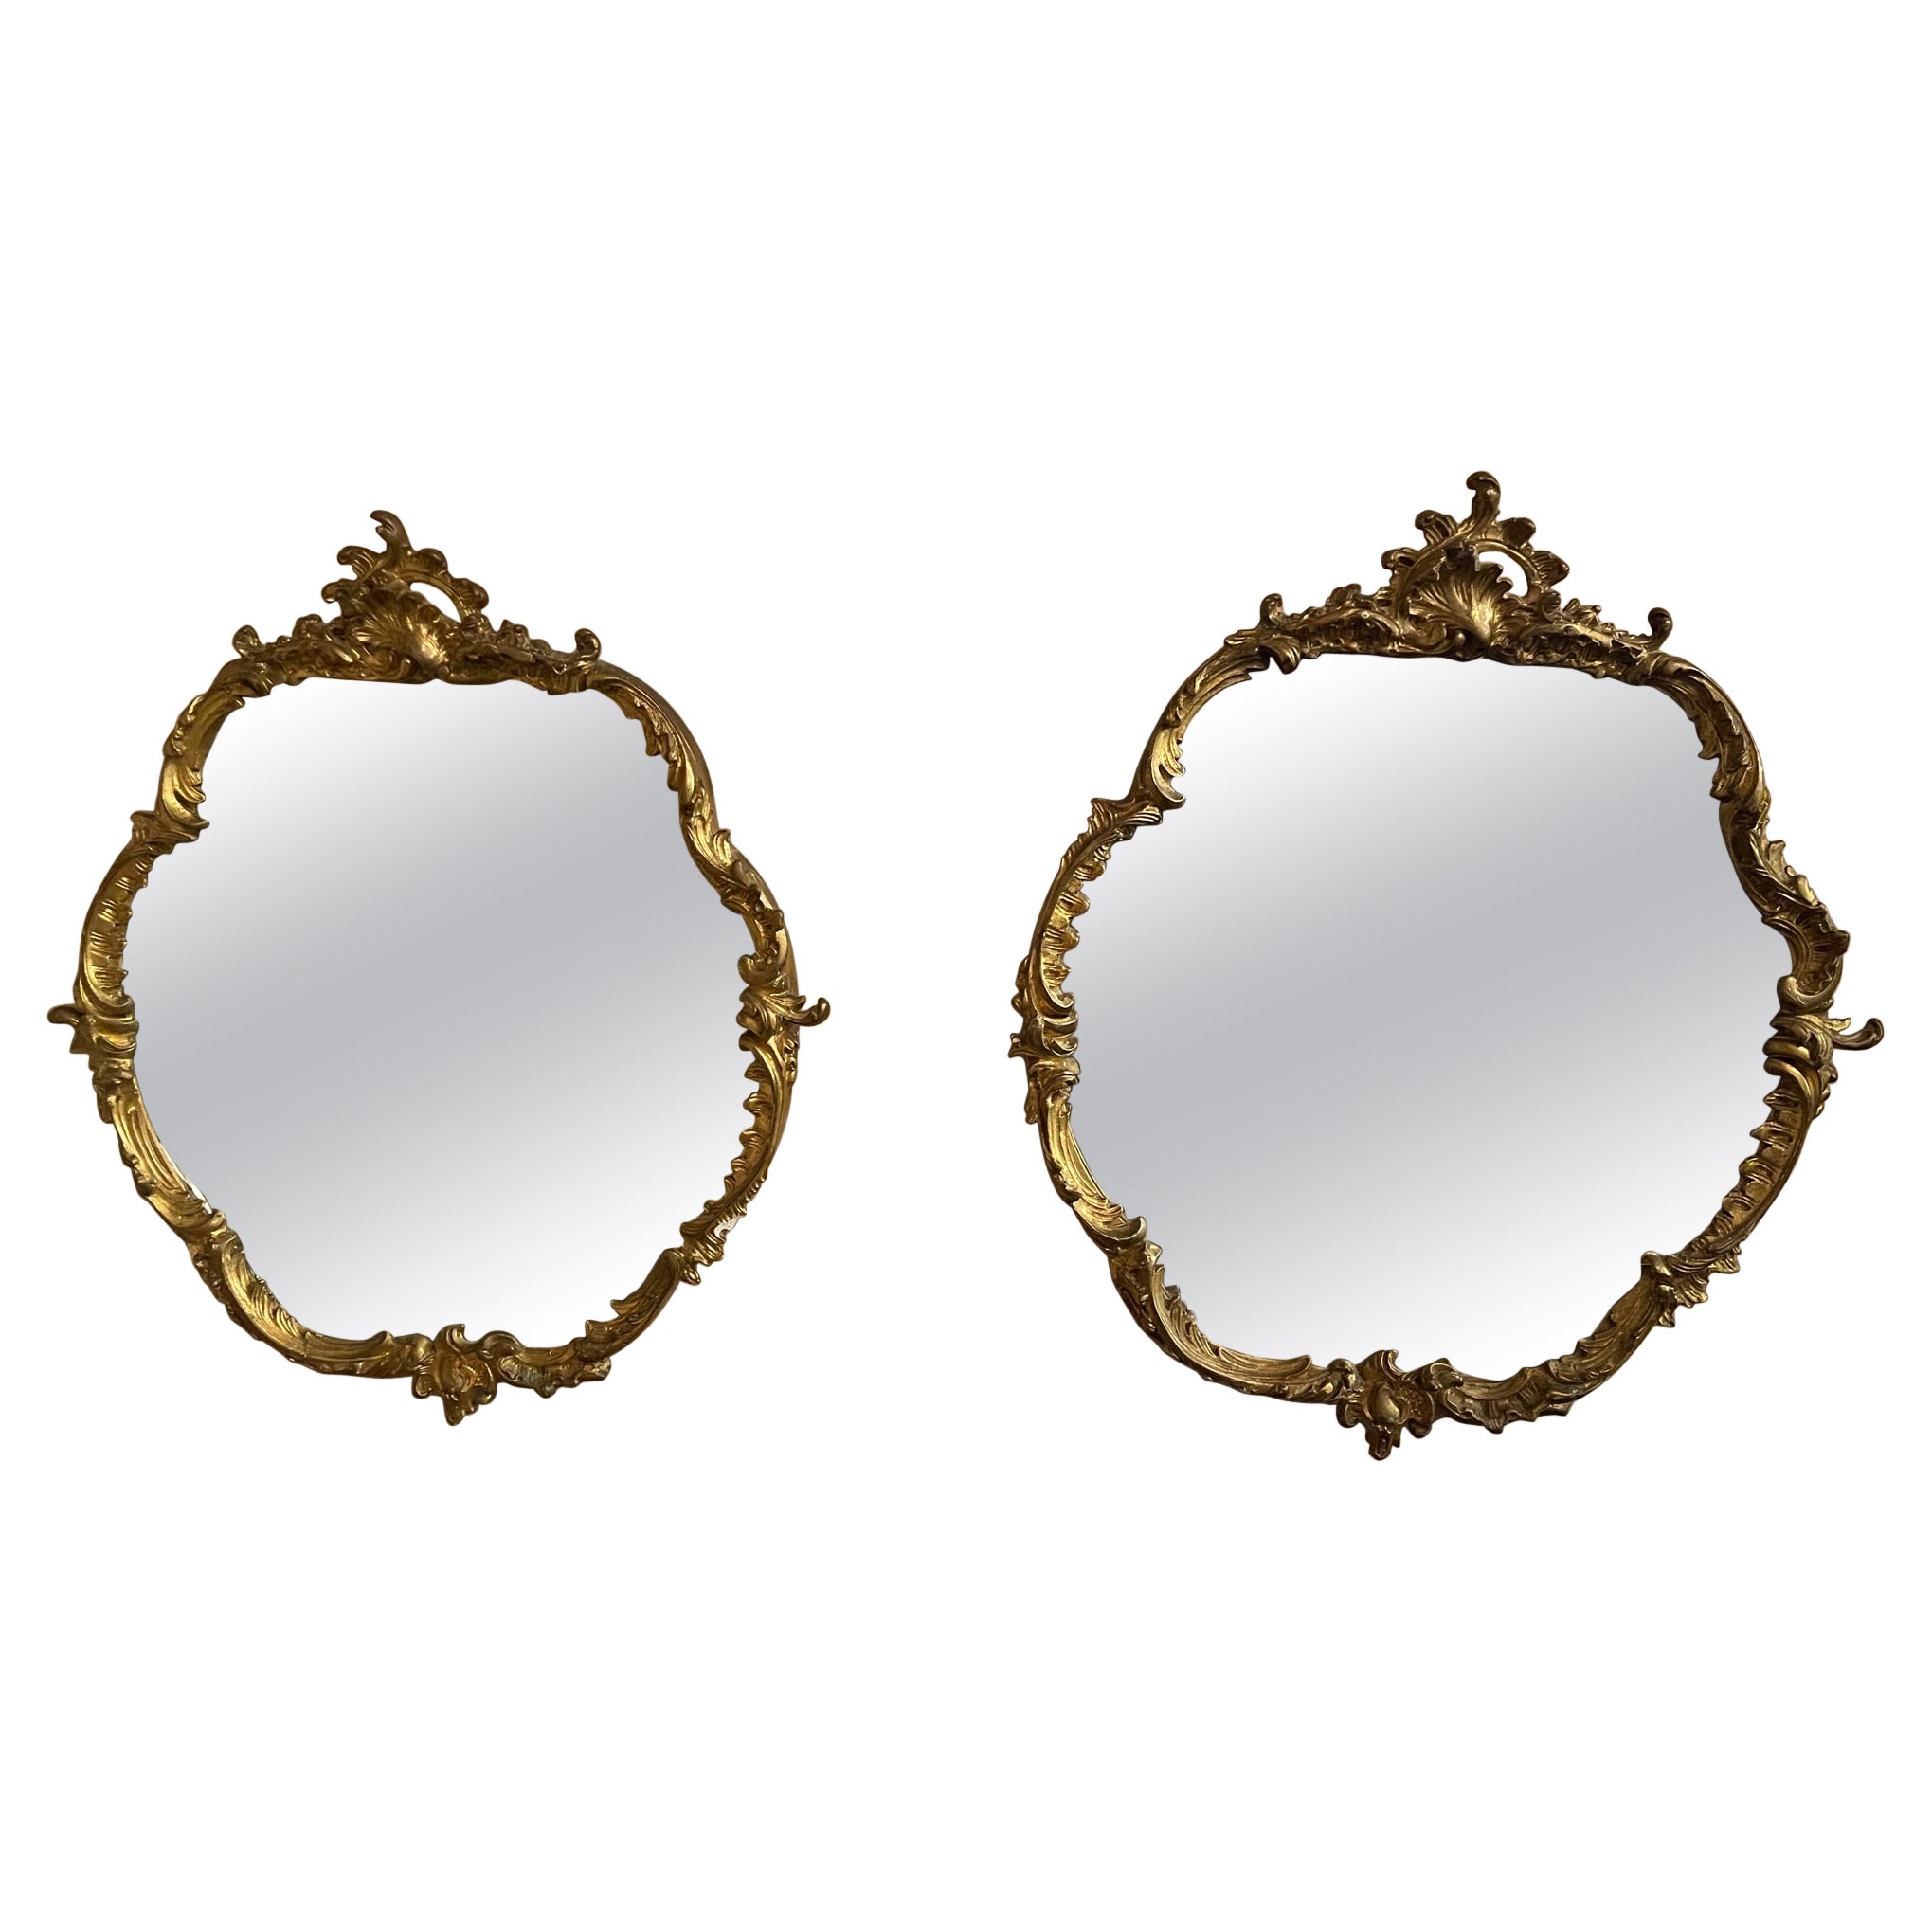 Pair of French Louis XV Style Carved & Gilded Rounded Mirrors, 19th Century